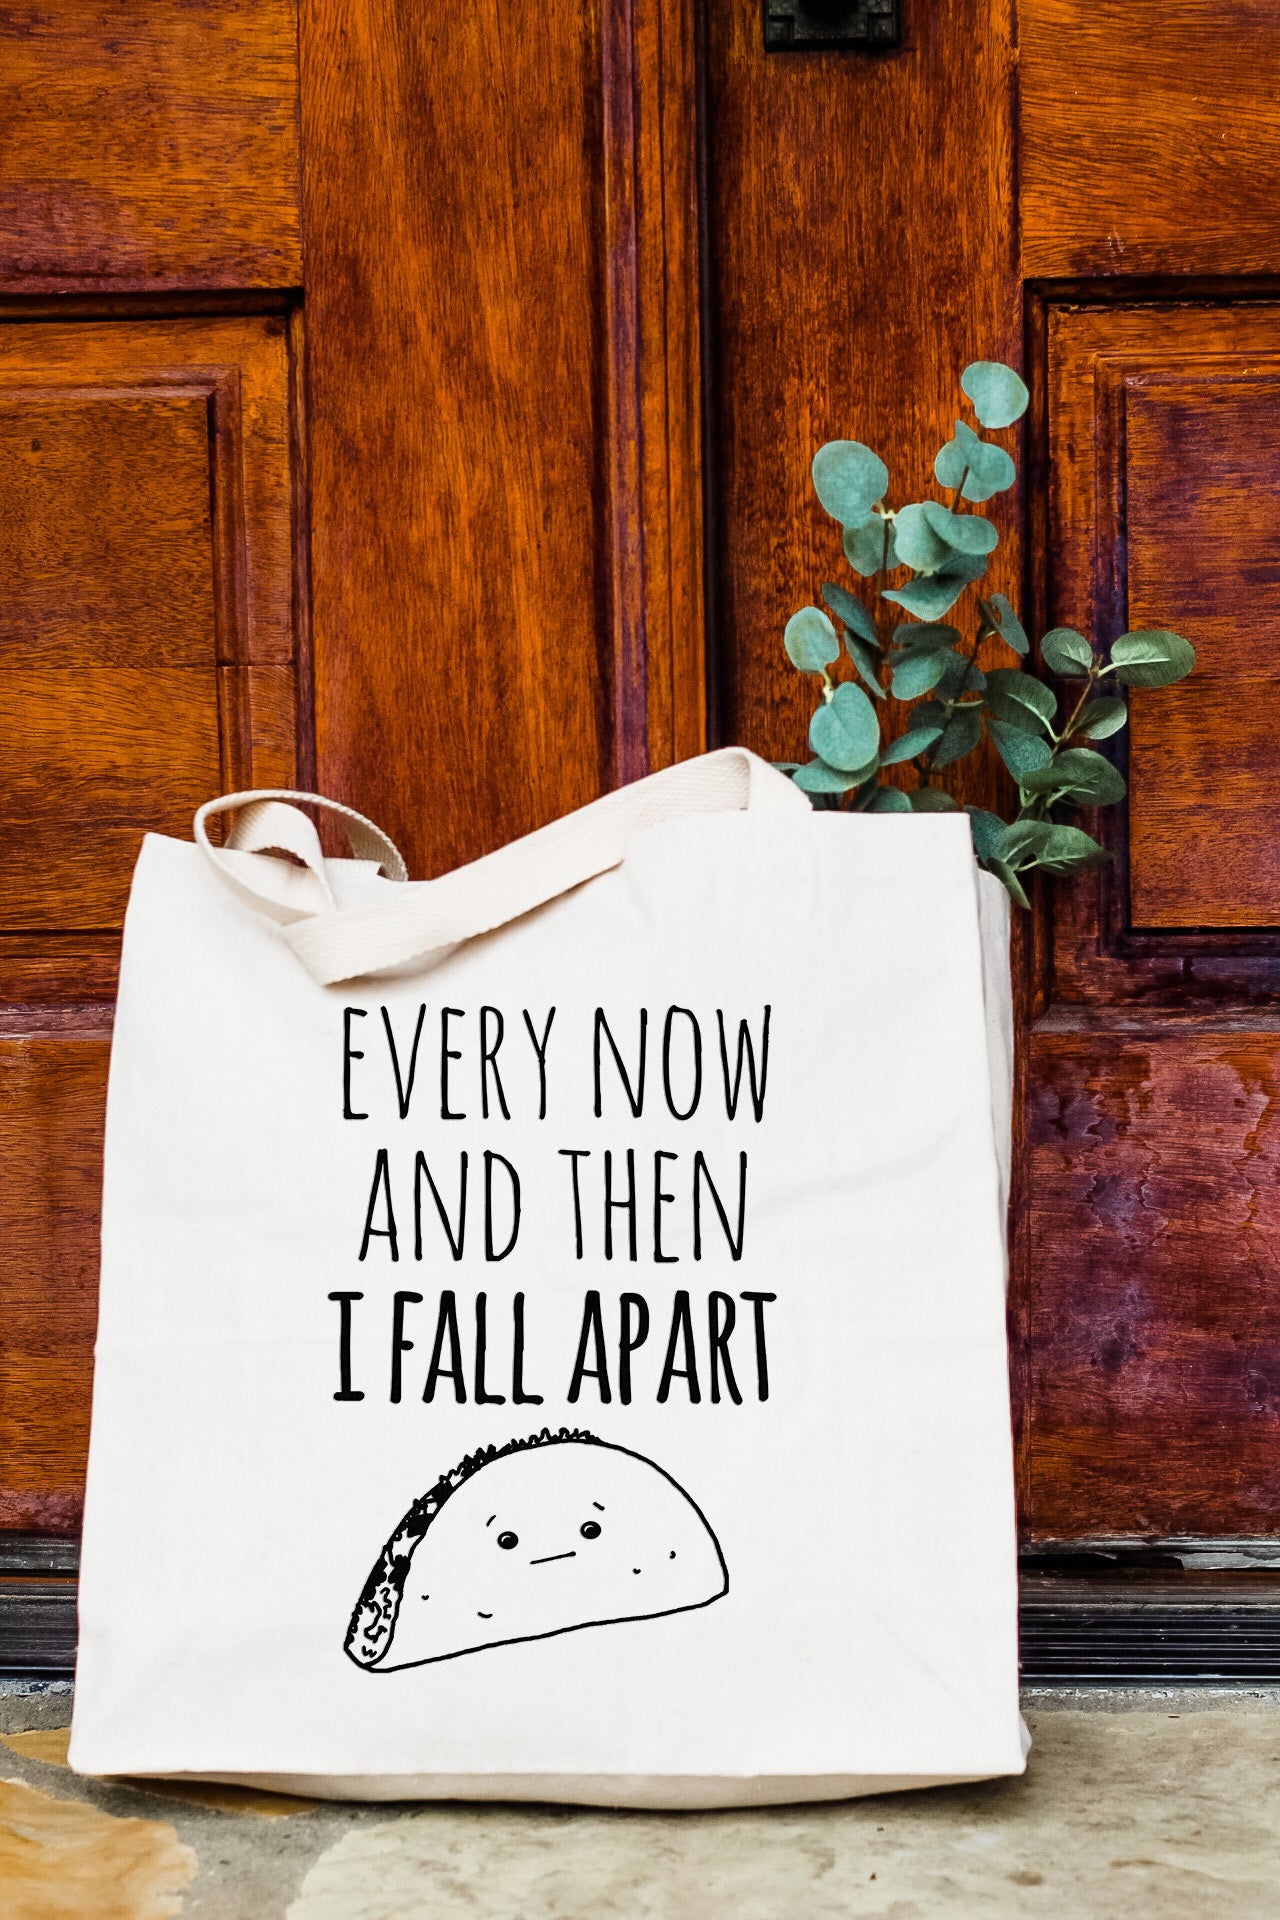 Every Now And Then I Fall Apart (Taco) - Tote Bag - MoonlightMakers